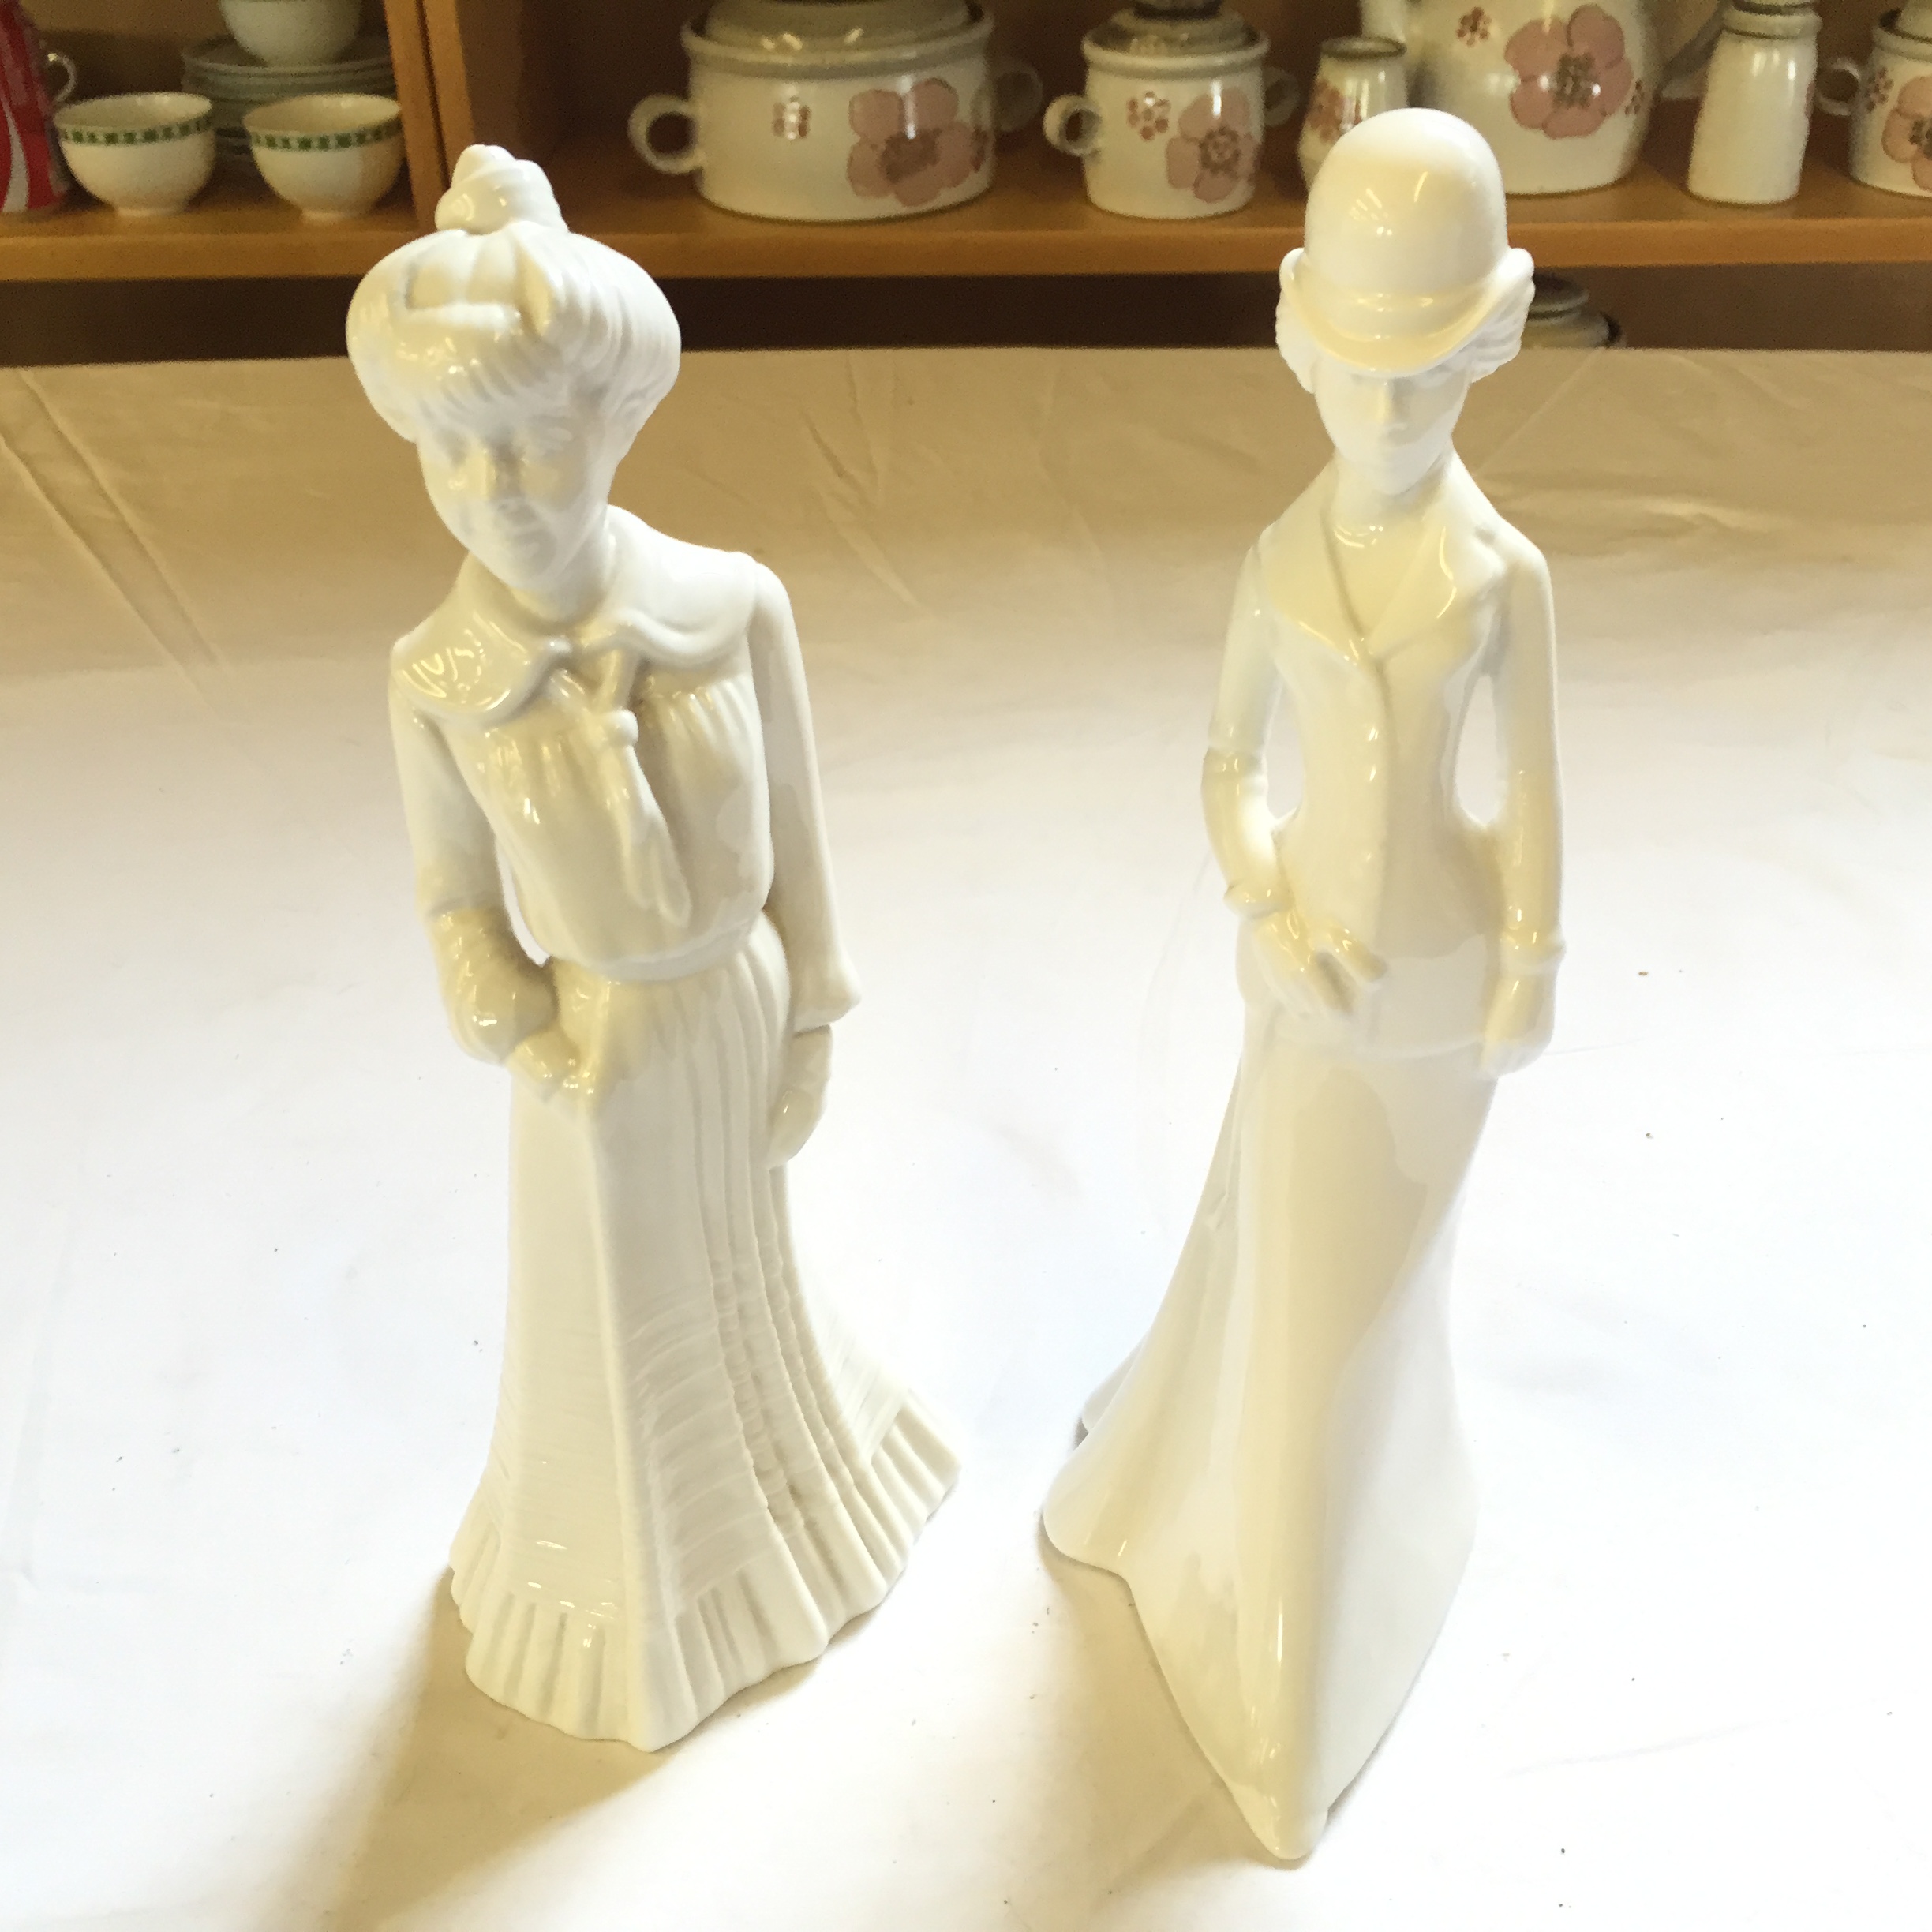 Two Spode white figurines.